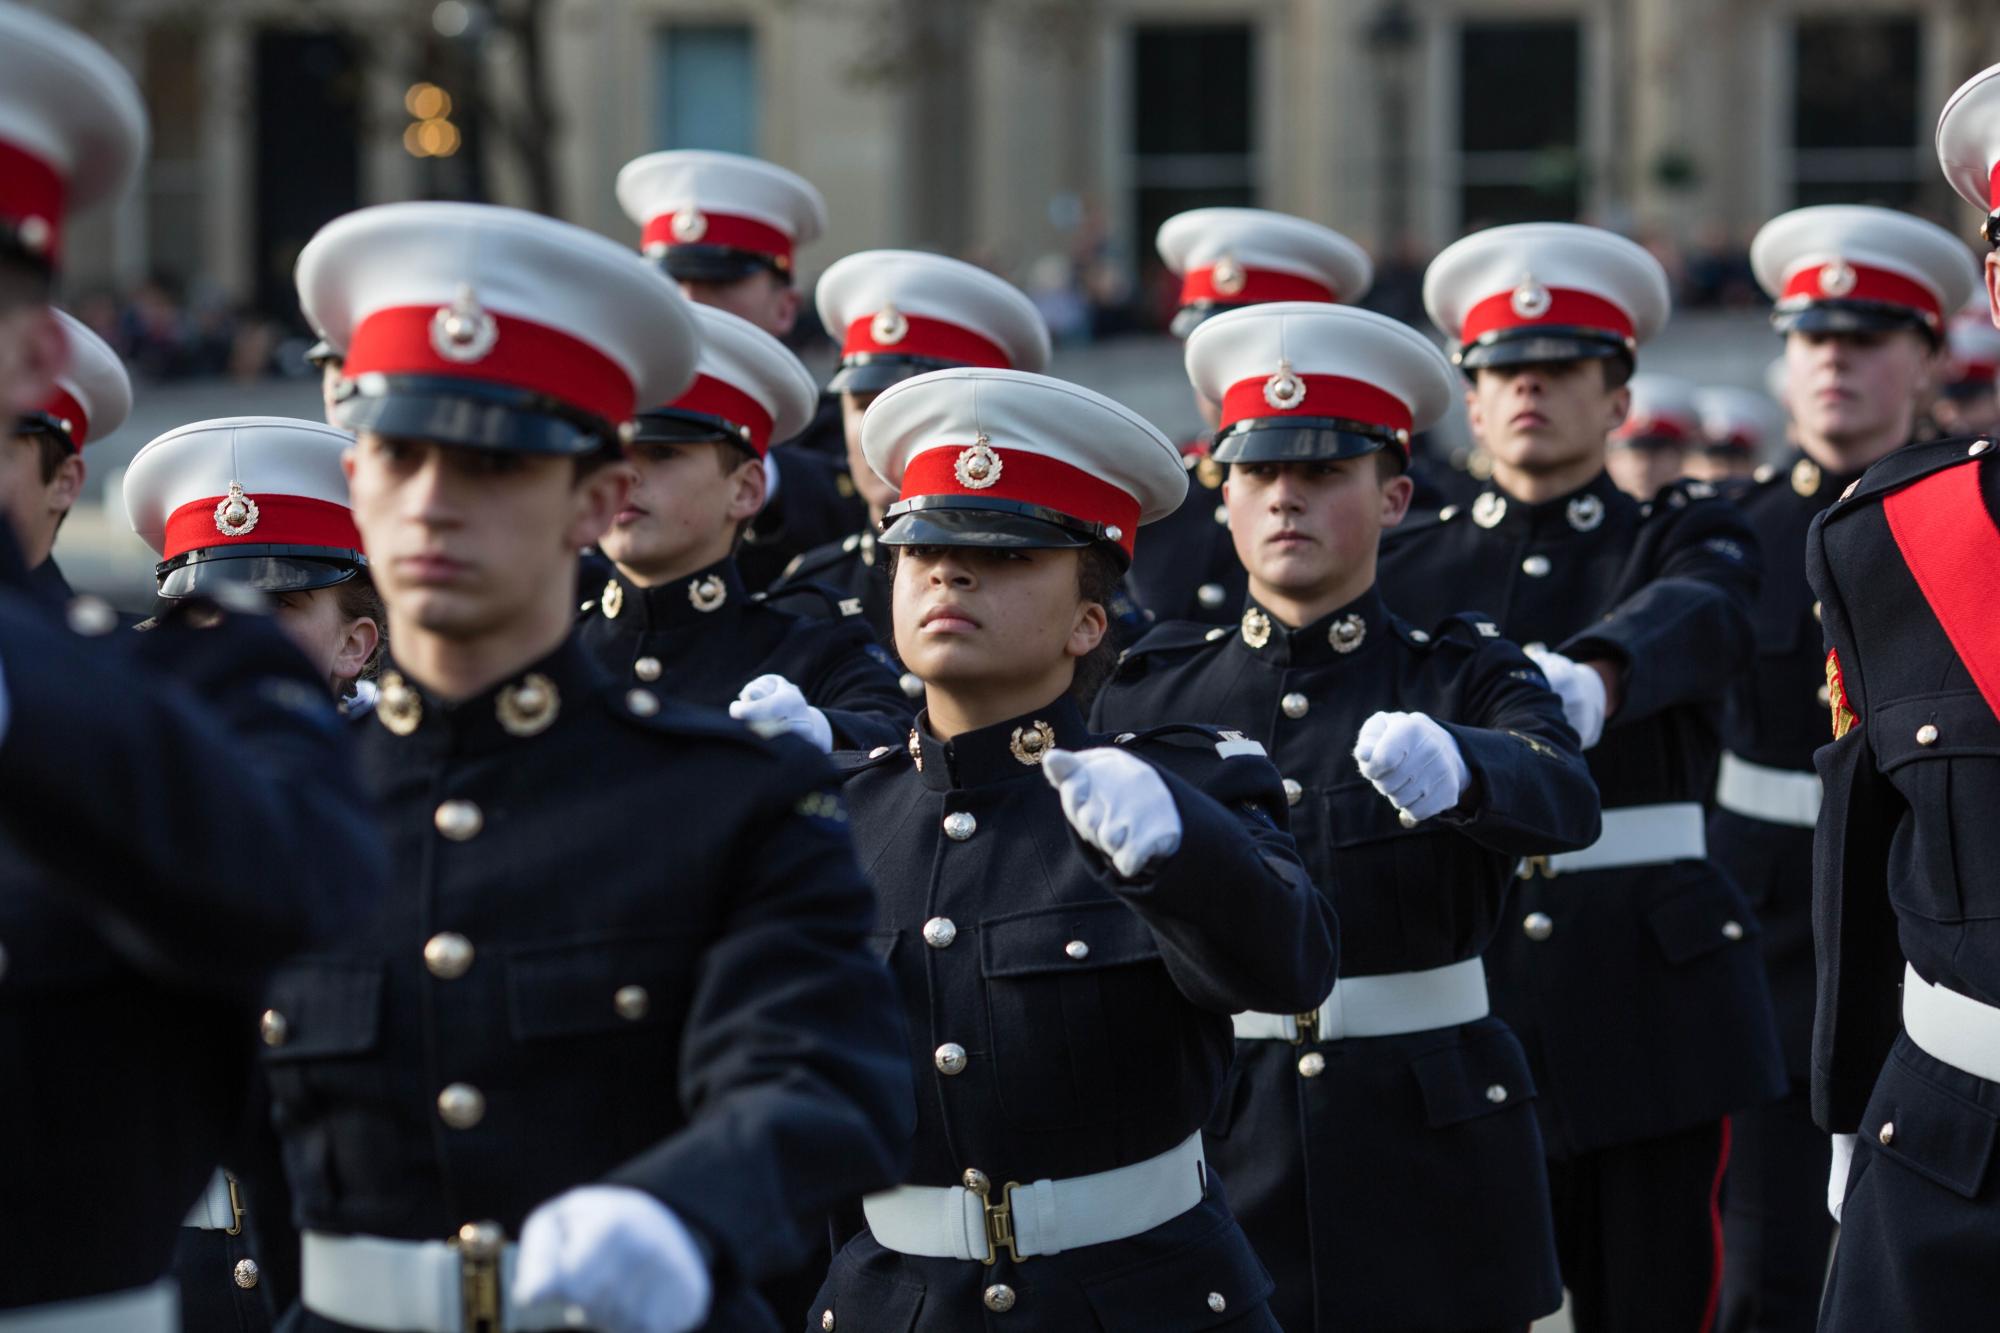 Royal Marine Cadets marching in uniform